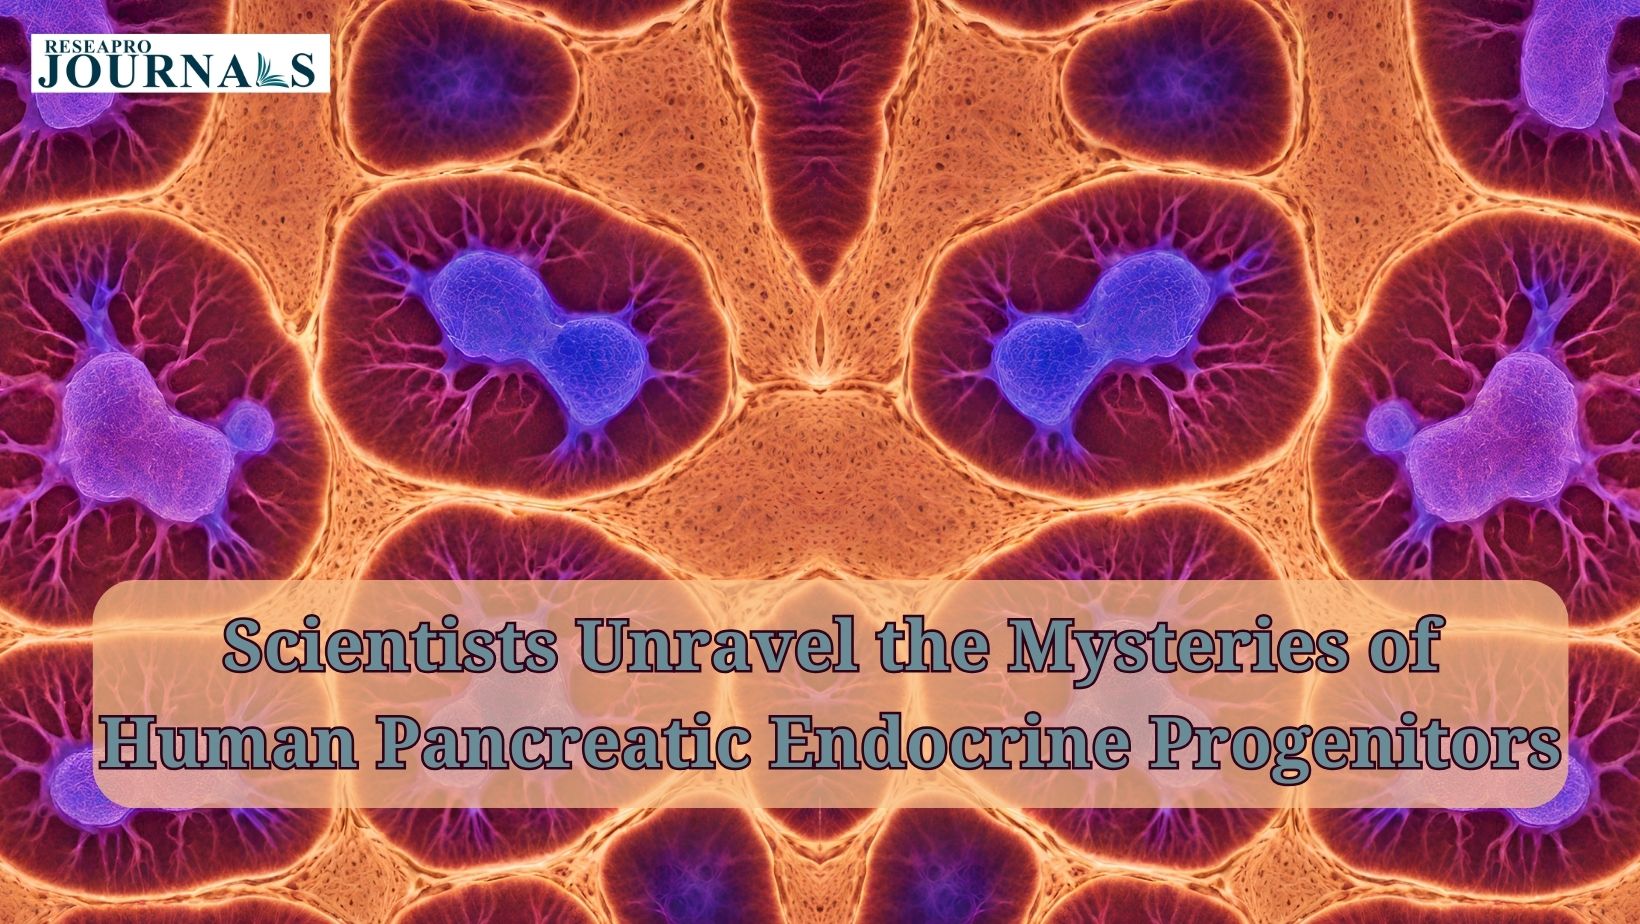 Scientists Unravel the Mysteries of Human Pancreatic Endocrine Progenitors